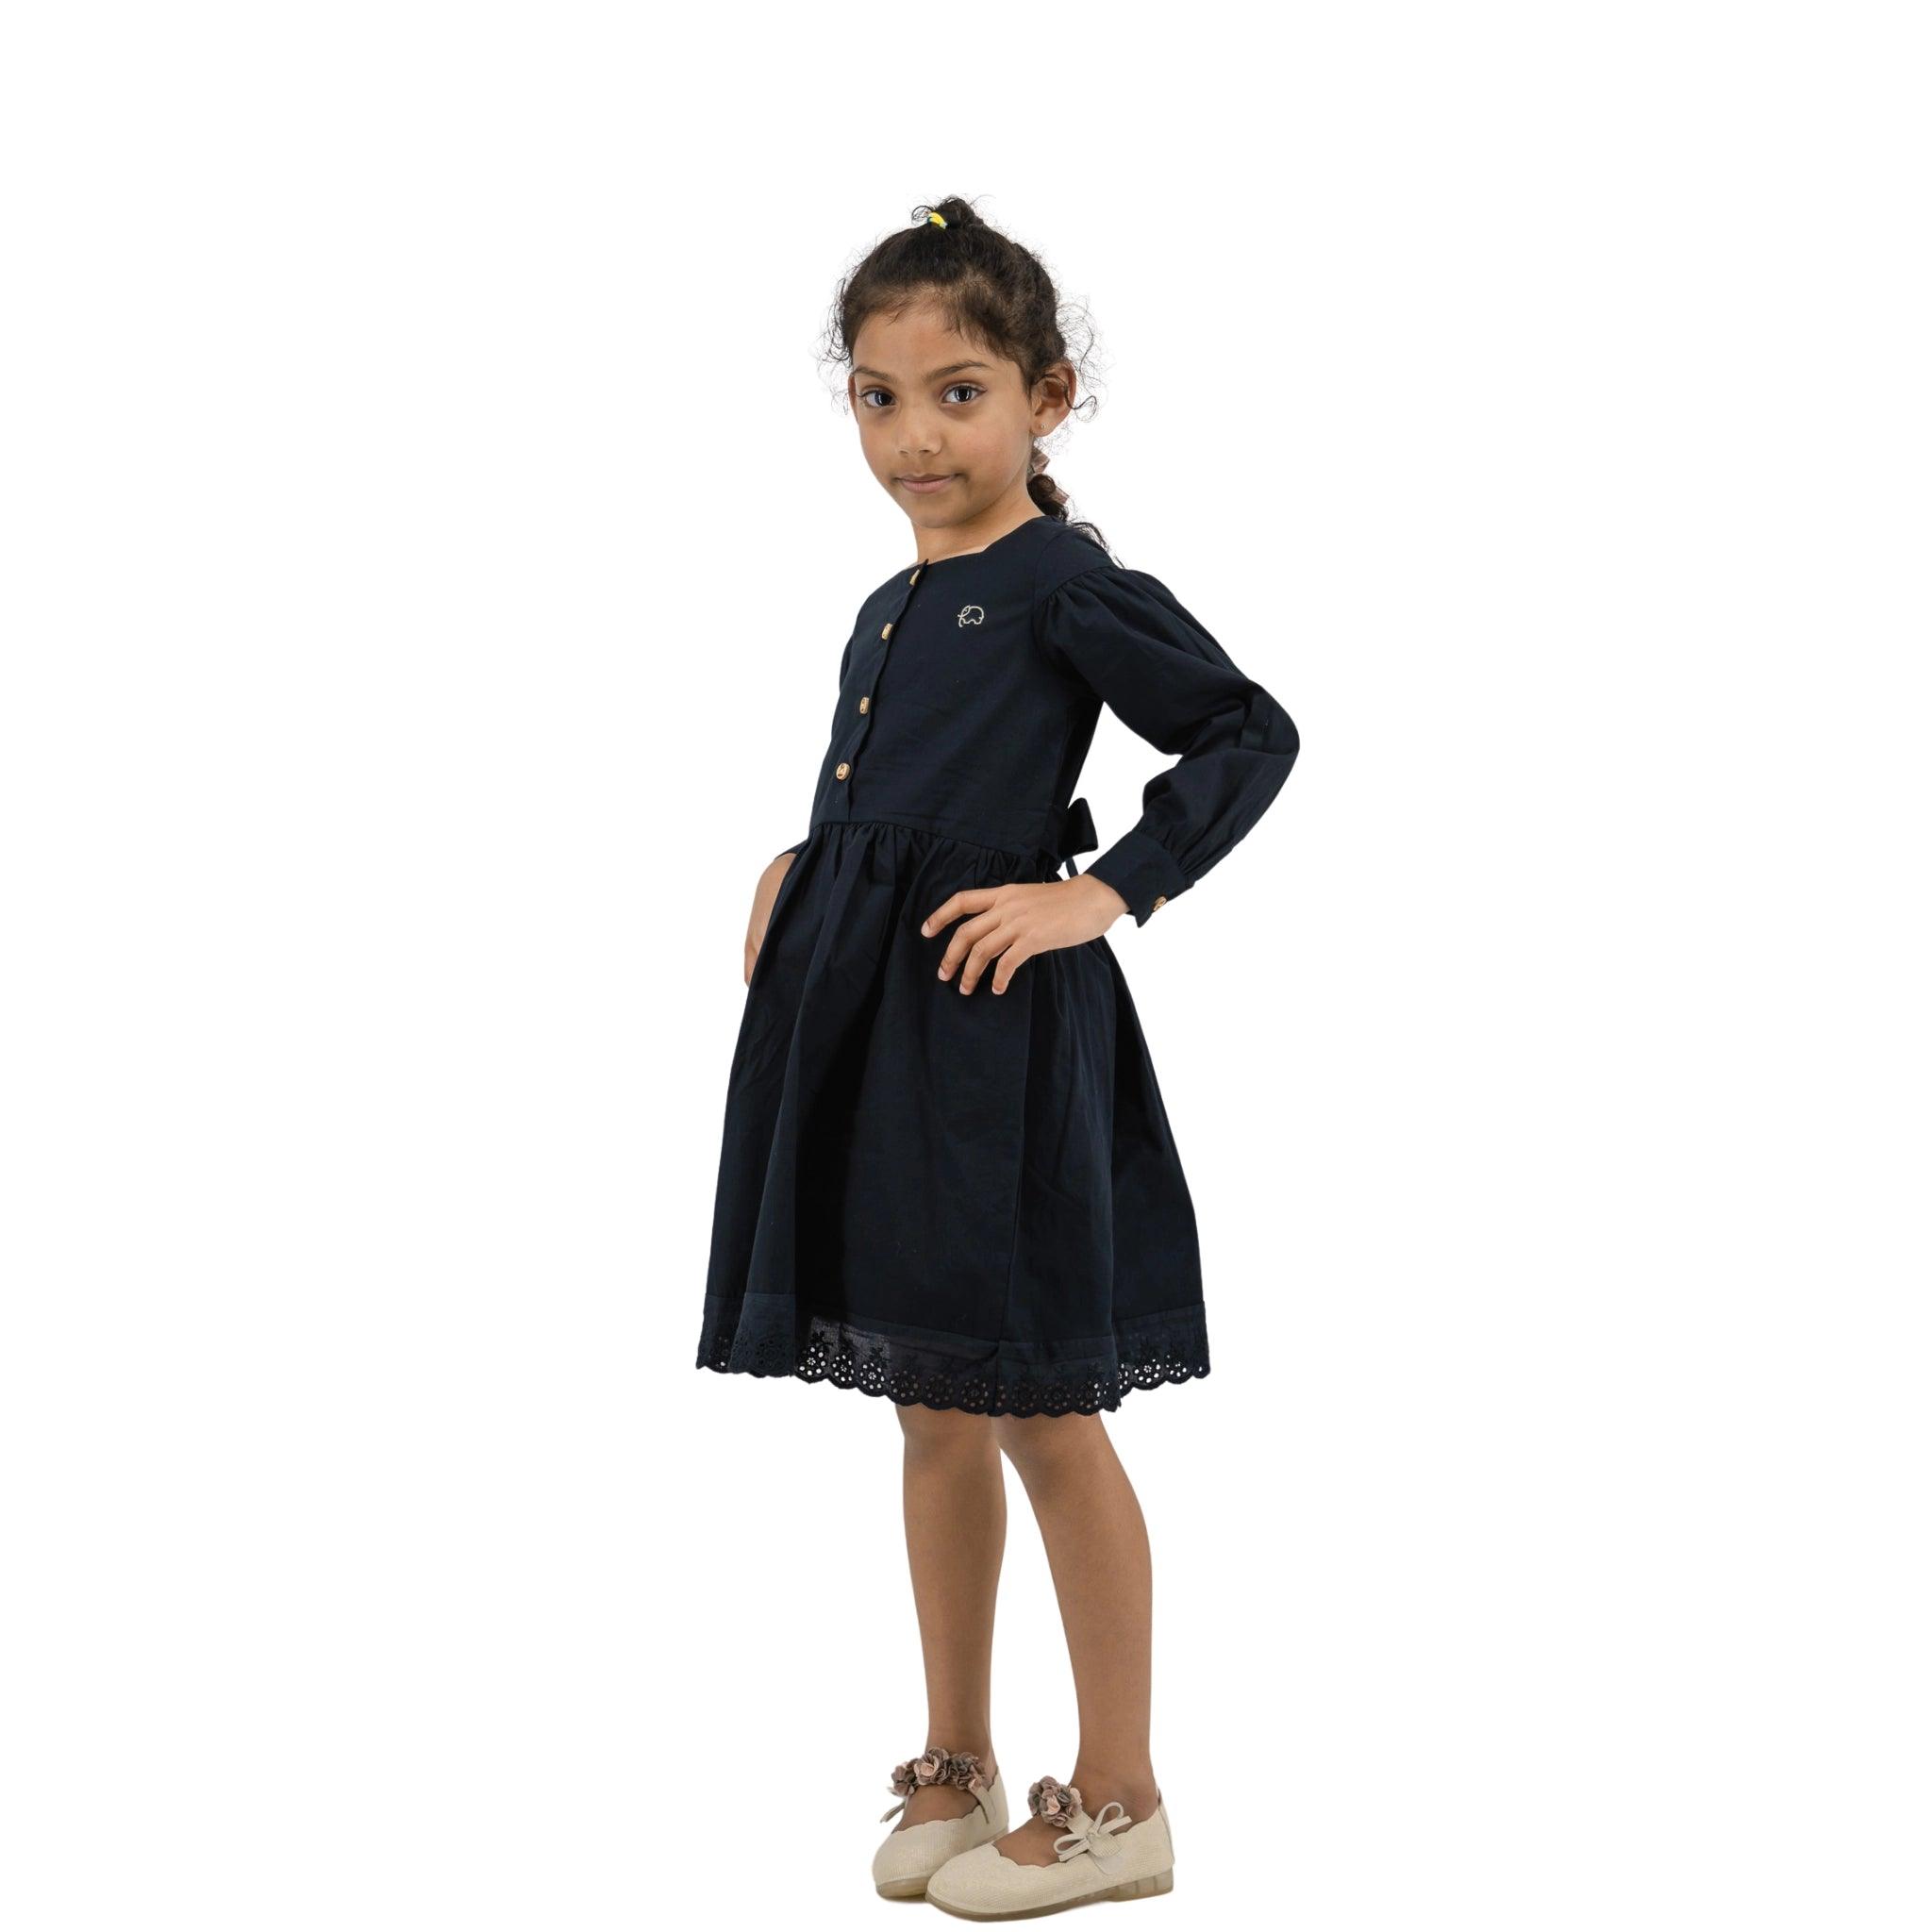 Young girl posing in a navy blue Karee dress with long puff sleeves and lace detailing, hands on hips, standing against a white background.